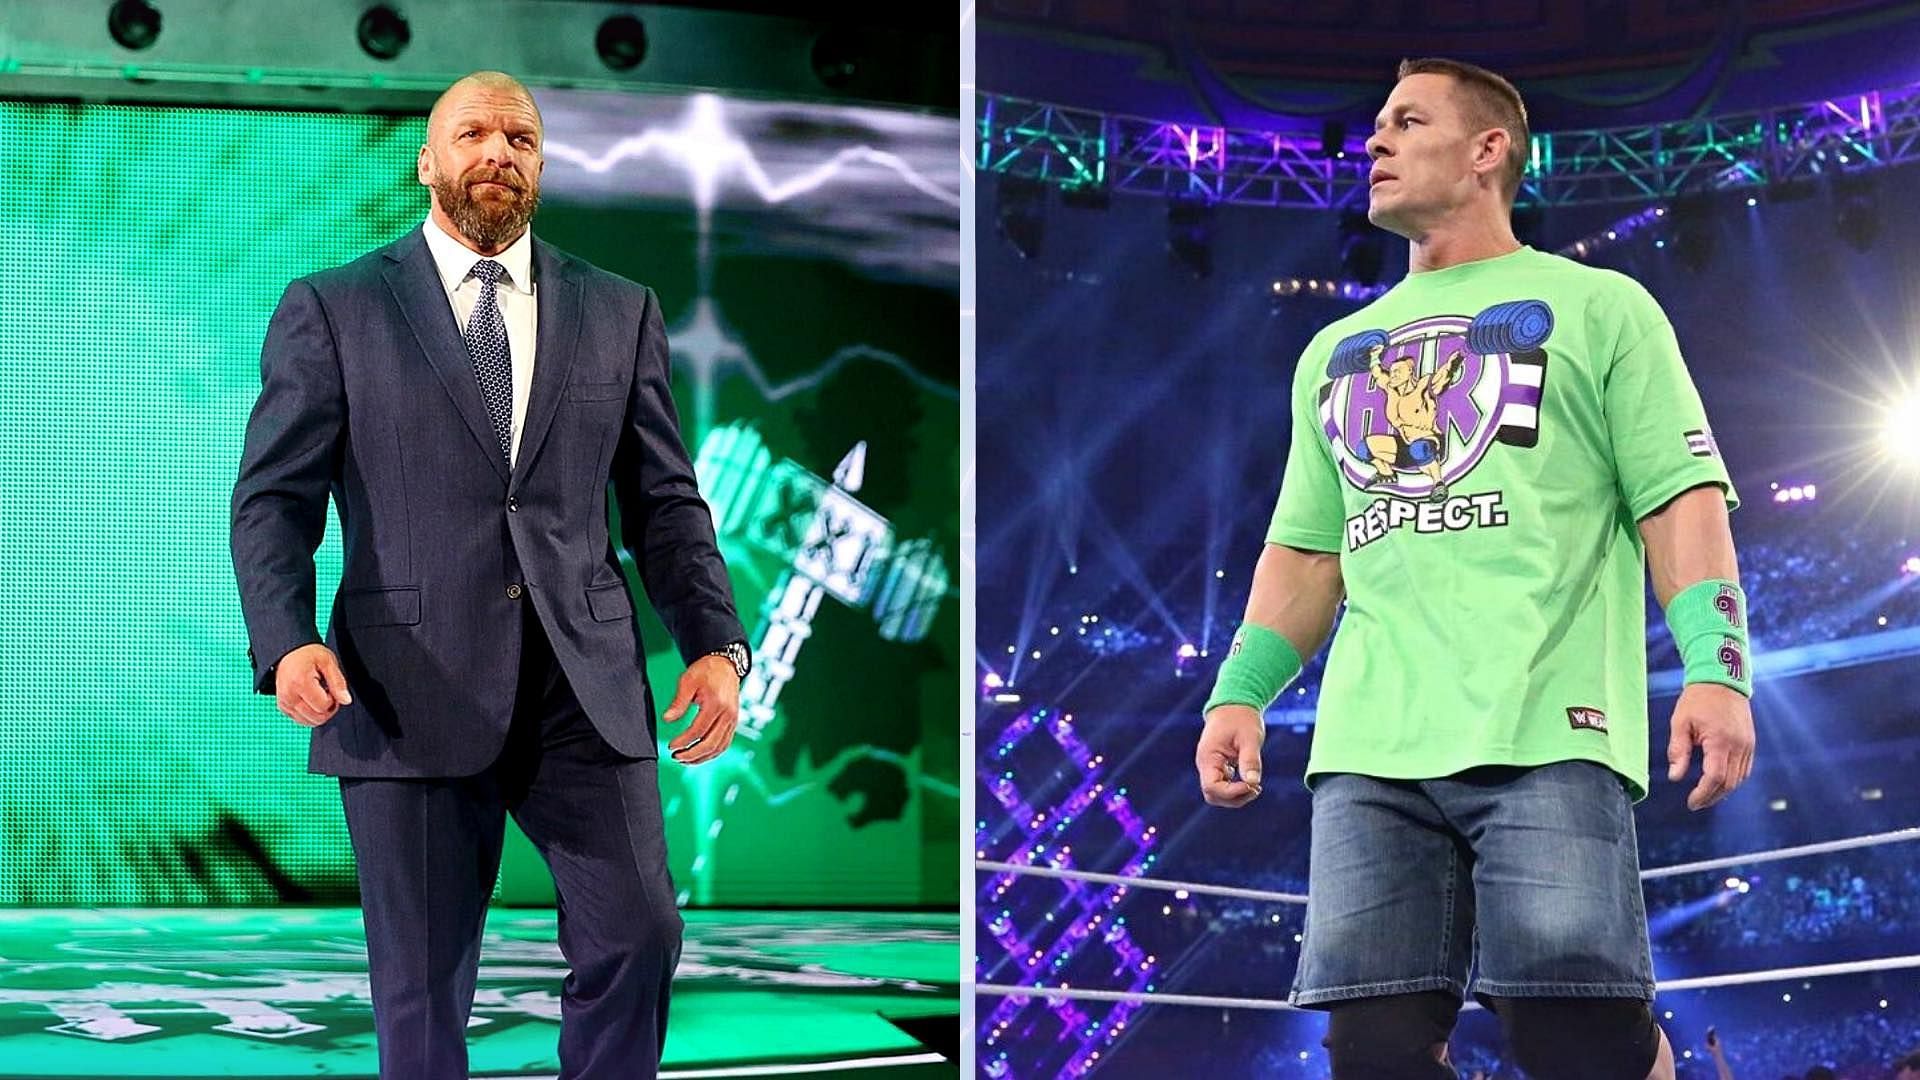 Why Does John Cena Wear Jorts When In The WWE Ring? | USA Insider